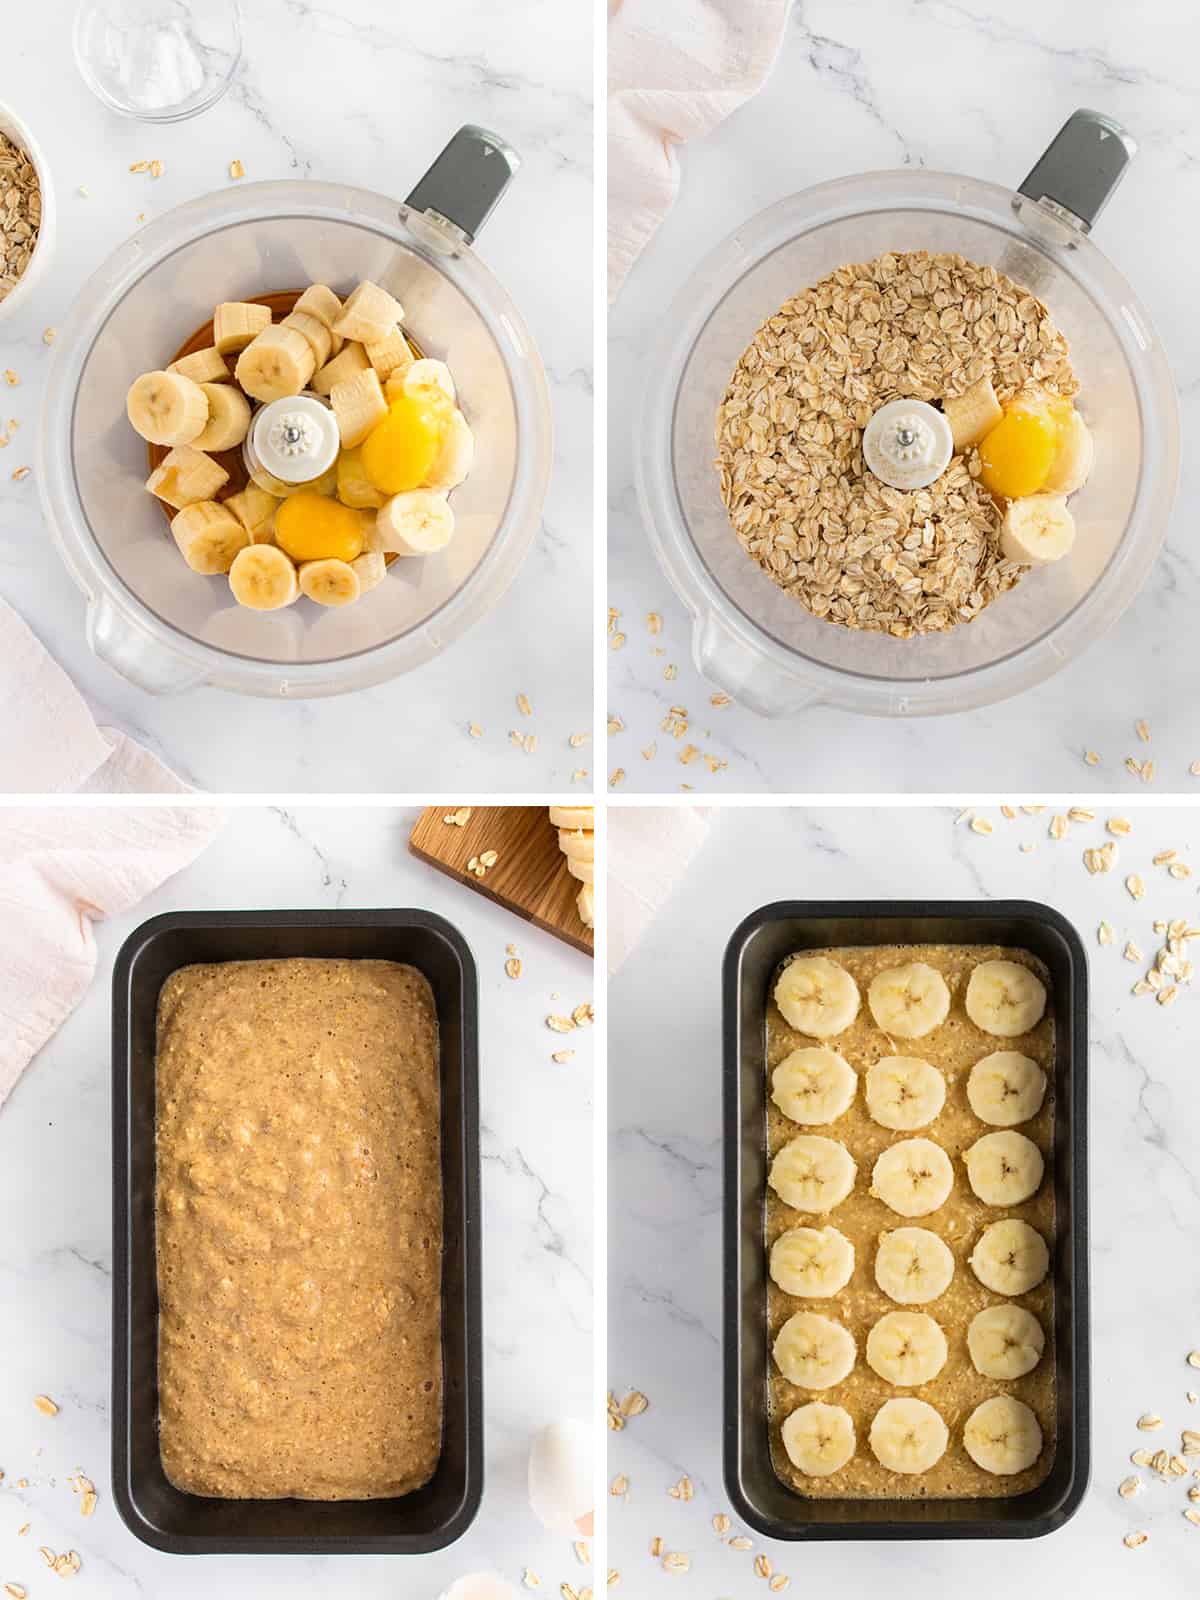 5-Ingredient Flourless Banana Bread by The BakerMama